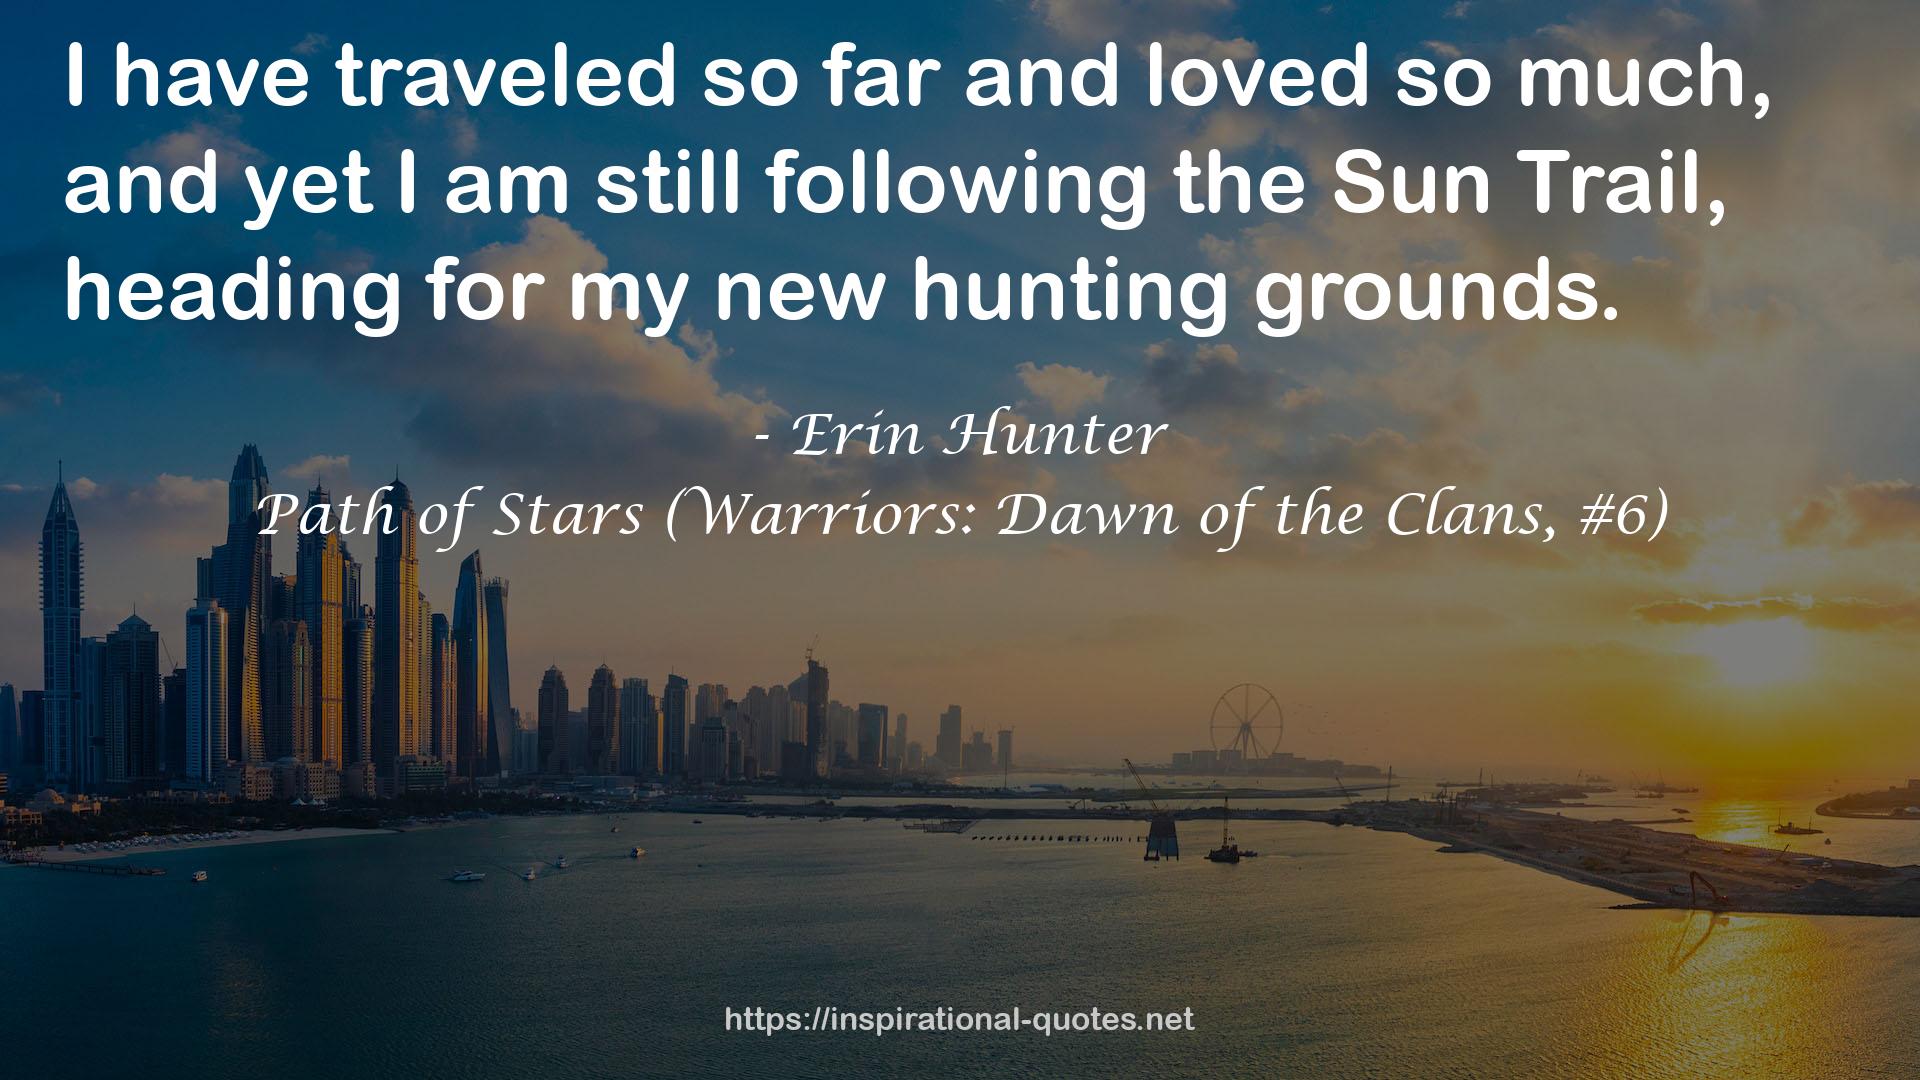 Path of Stars (Warriors: Dawn of the Clans, #6) QUOTES